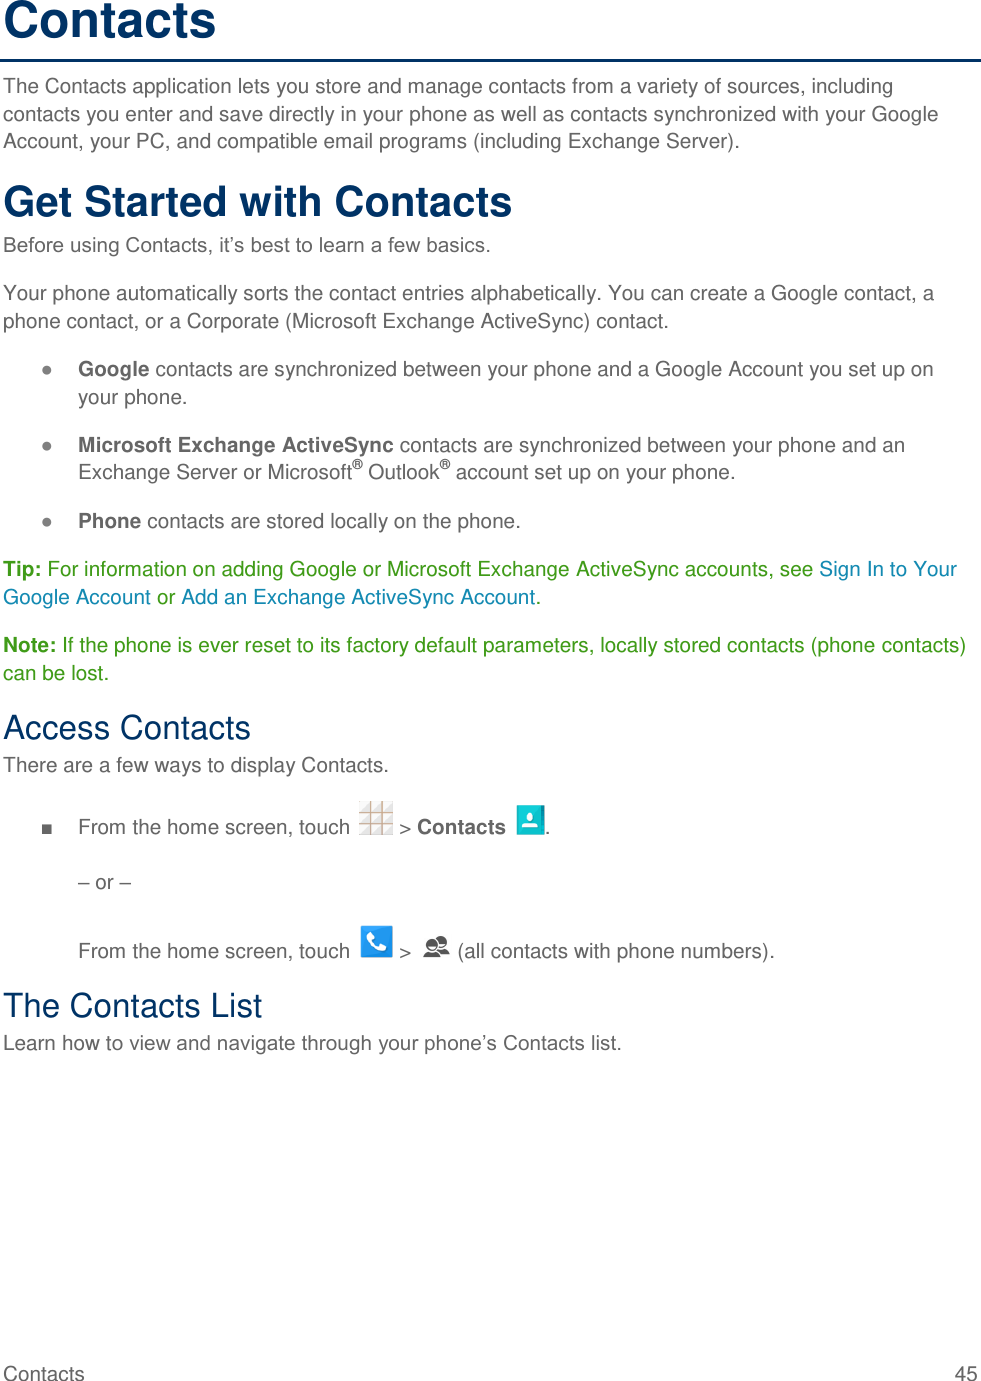 Contacts  45 Contacts The Contacts application lets you store and manage contacts from a variety of sources, including contacts you enter and save directly in your phone as well as contacts synchronized with your Google Account, your PC, and compatible email programs (including Exchange Server). Get Started with Contacts Before using Contacts, it’s best to learn a few basics. Your phone automatically sorts the contact entries alphabetically. You can create a Google contact, a phone contact, or a Corporate (Microsoft Exchange ActiveSync) contact. ● Google contacts are synchronized between your phone and a Google Account you set up on your phone. ● Microsoft Exchange ActiveSync contacts are synchronized between your phone and an Exchange Server or Microsoft® Outlook® account set up on your phone. ● Phone contacts are stored locally on the phone. Tip: For information on adding Google or Microsoft Exchange ActiveSync accounts, see Sign In to Your Google Account or Add an Exchange ActiveSync Account. Note: If the phone is ever reset to its factory default parameters, locally stored contacts (phone contacts) can be lost. Access Contacts There are a few ways to display Contacts. ■  From the home screen, touch   &gt; Contacts  .  – or –   From the home screen, touch   &gt;   (all contacts with phone numbers). The Contacts List Learn how to view and navigate through your phone’s Contacts list. 